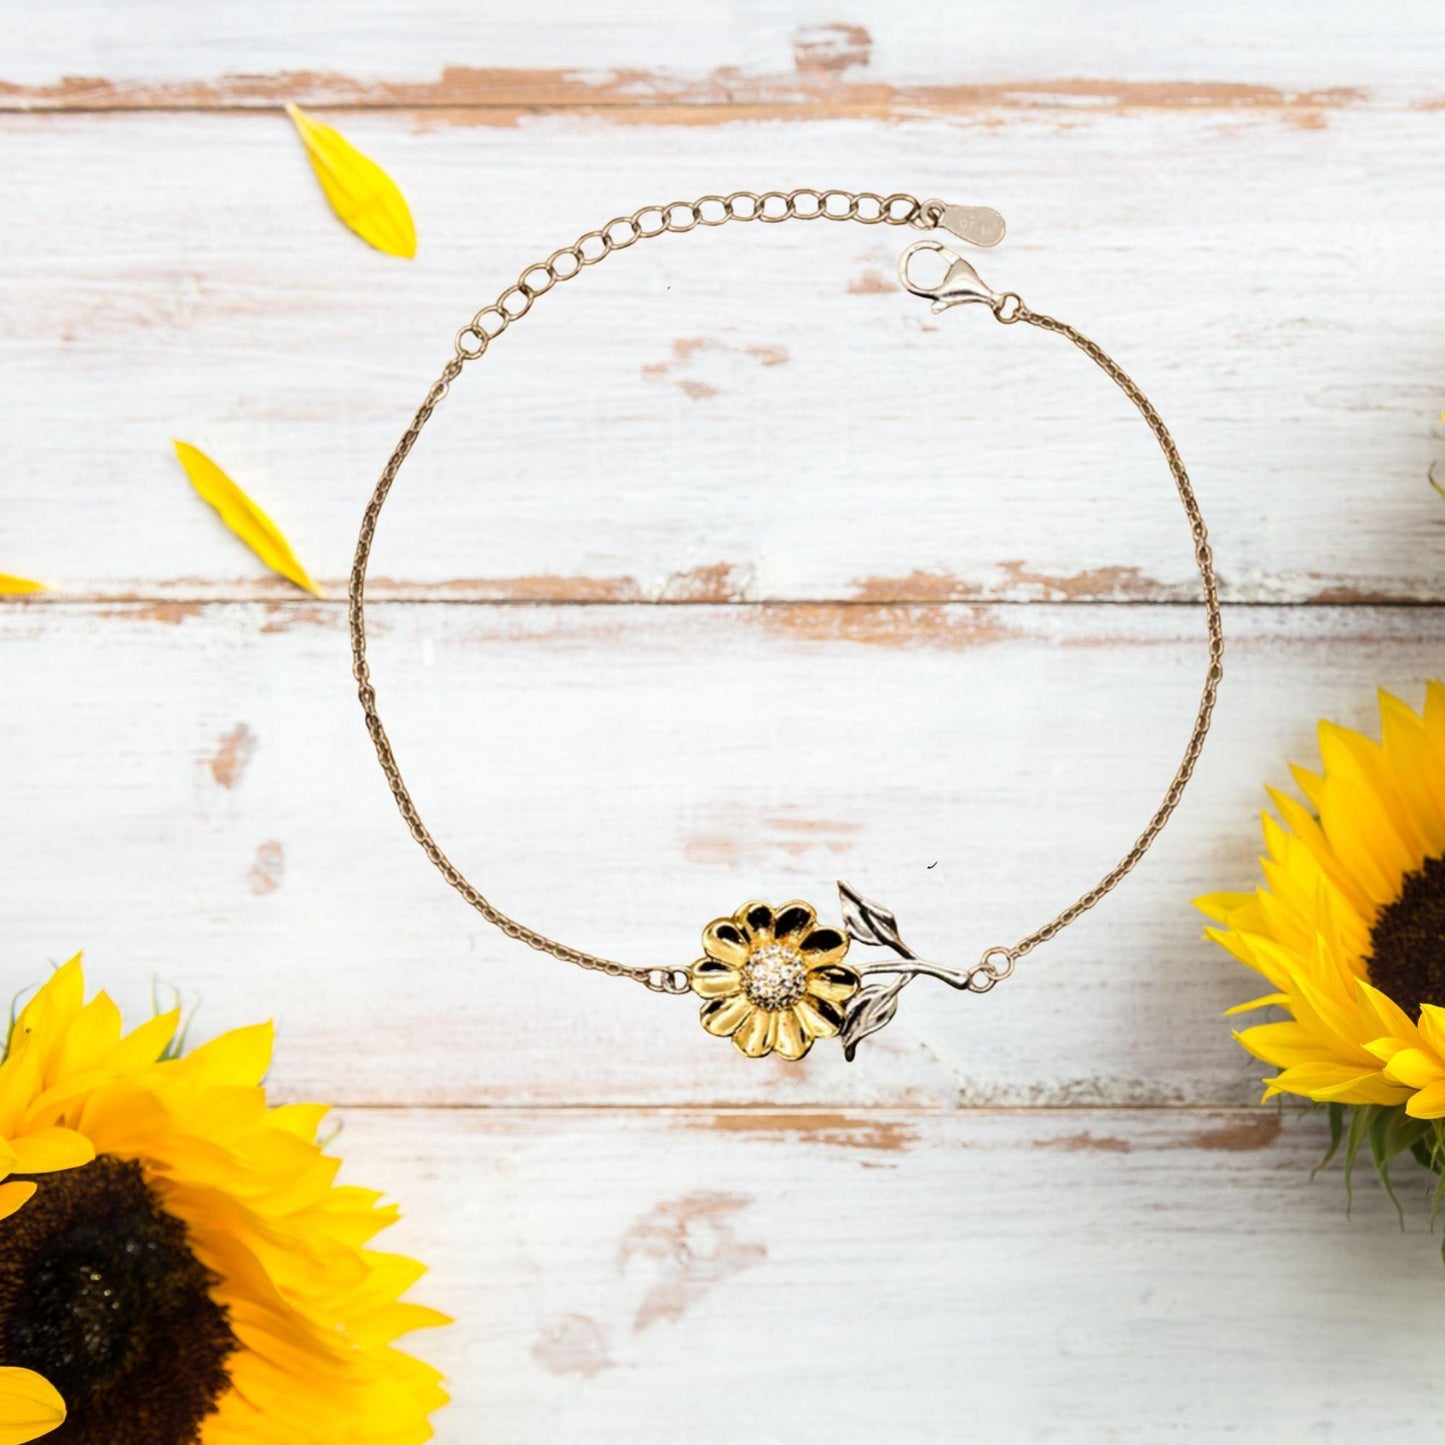 Motivational Daughter-In-Law Sunflower Bracelet - I can promise to love you for the rest of my life, Birthday, Christmas Holiday Jewelry Gift - Mallard Moon Gift Shop